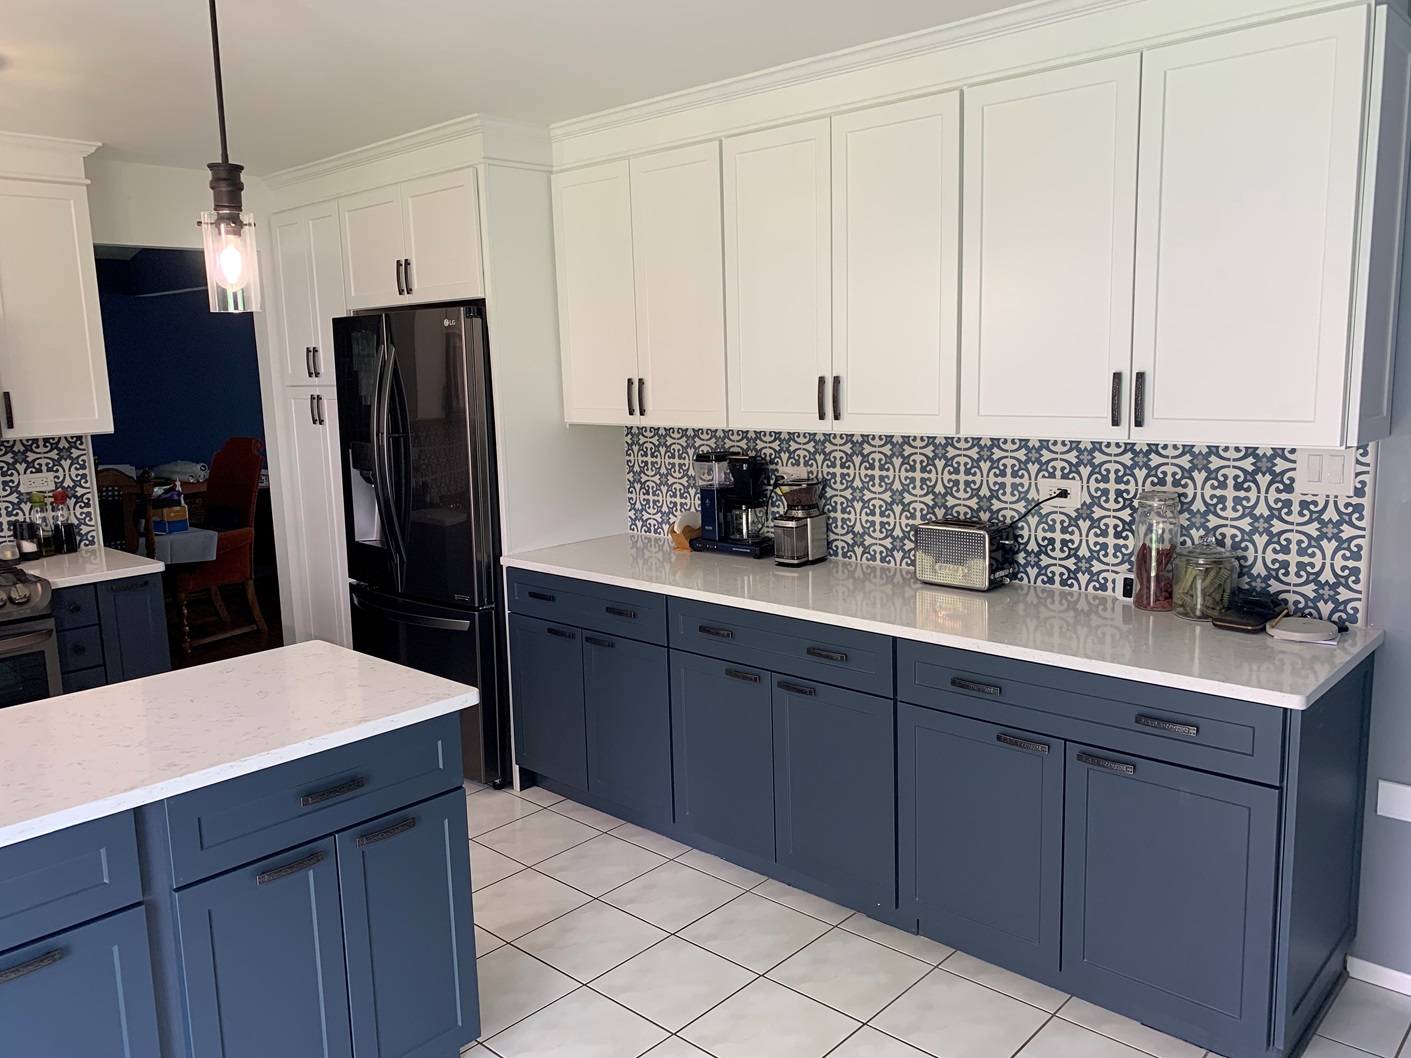 Dive into a world of coastal charm with our stunning blue and white Cabinet Redooring for your kitch Kitchen Tune-Up Savannah Brunswick Savannah (912)424-8907